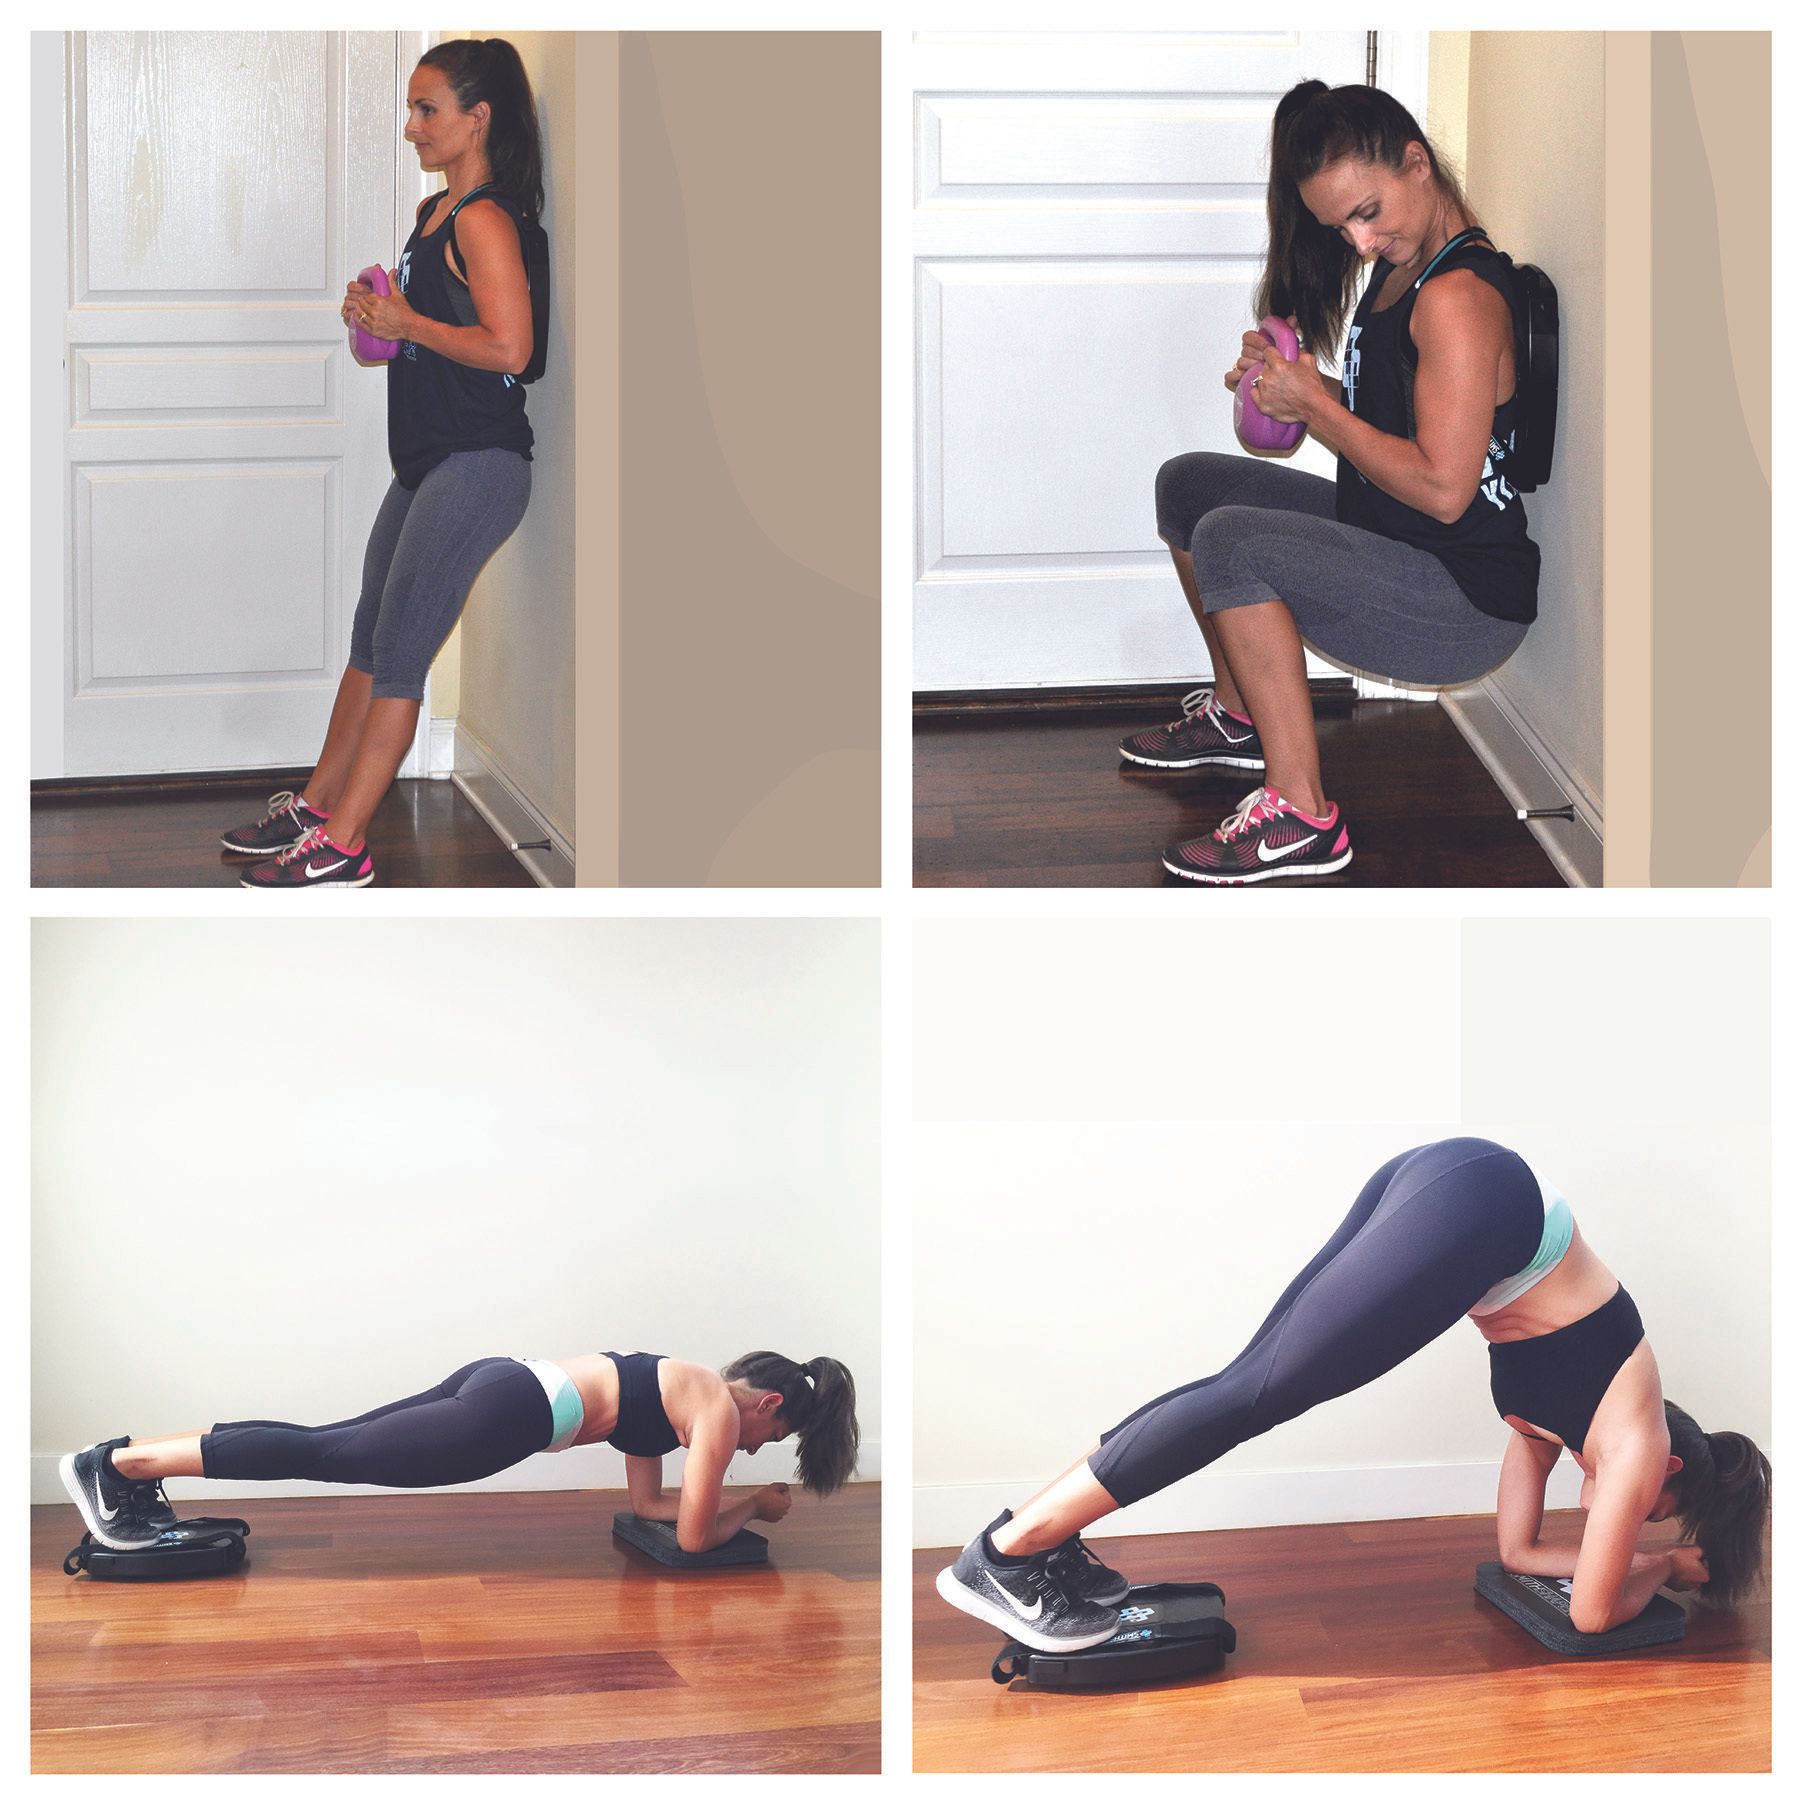 shows four images of women in the beginning and ending positions of both the SmithShaper Power Squat exercise and the SmithShaper Pike Plank Core Crusher exercise as they use a SmithShaper FIT ASR multipurpose exerciser that supports 25 exercises